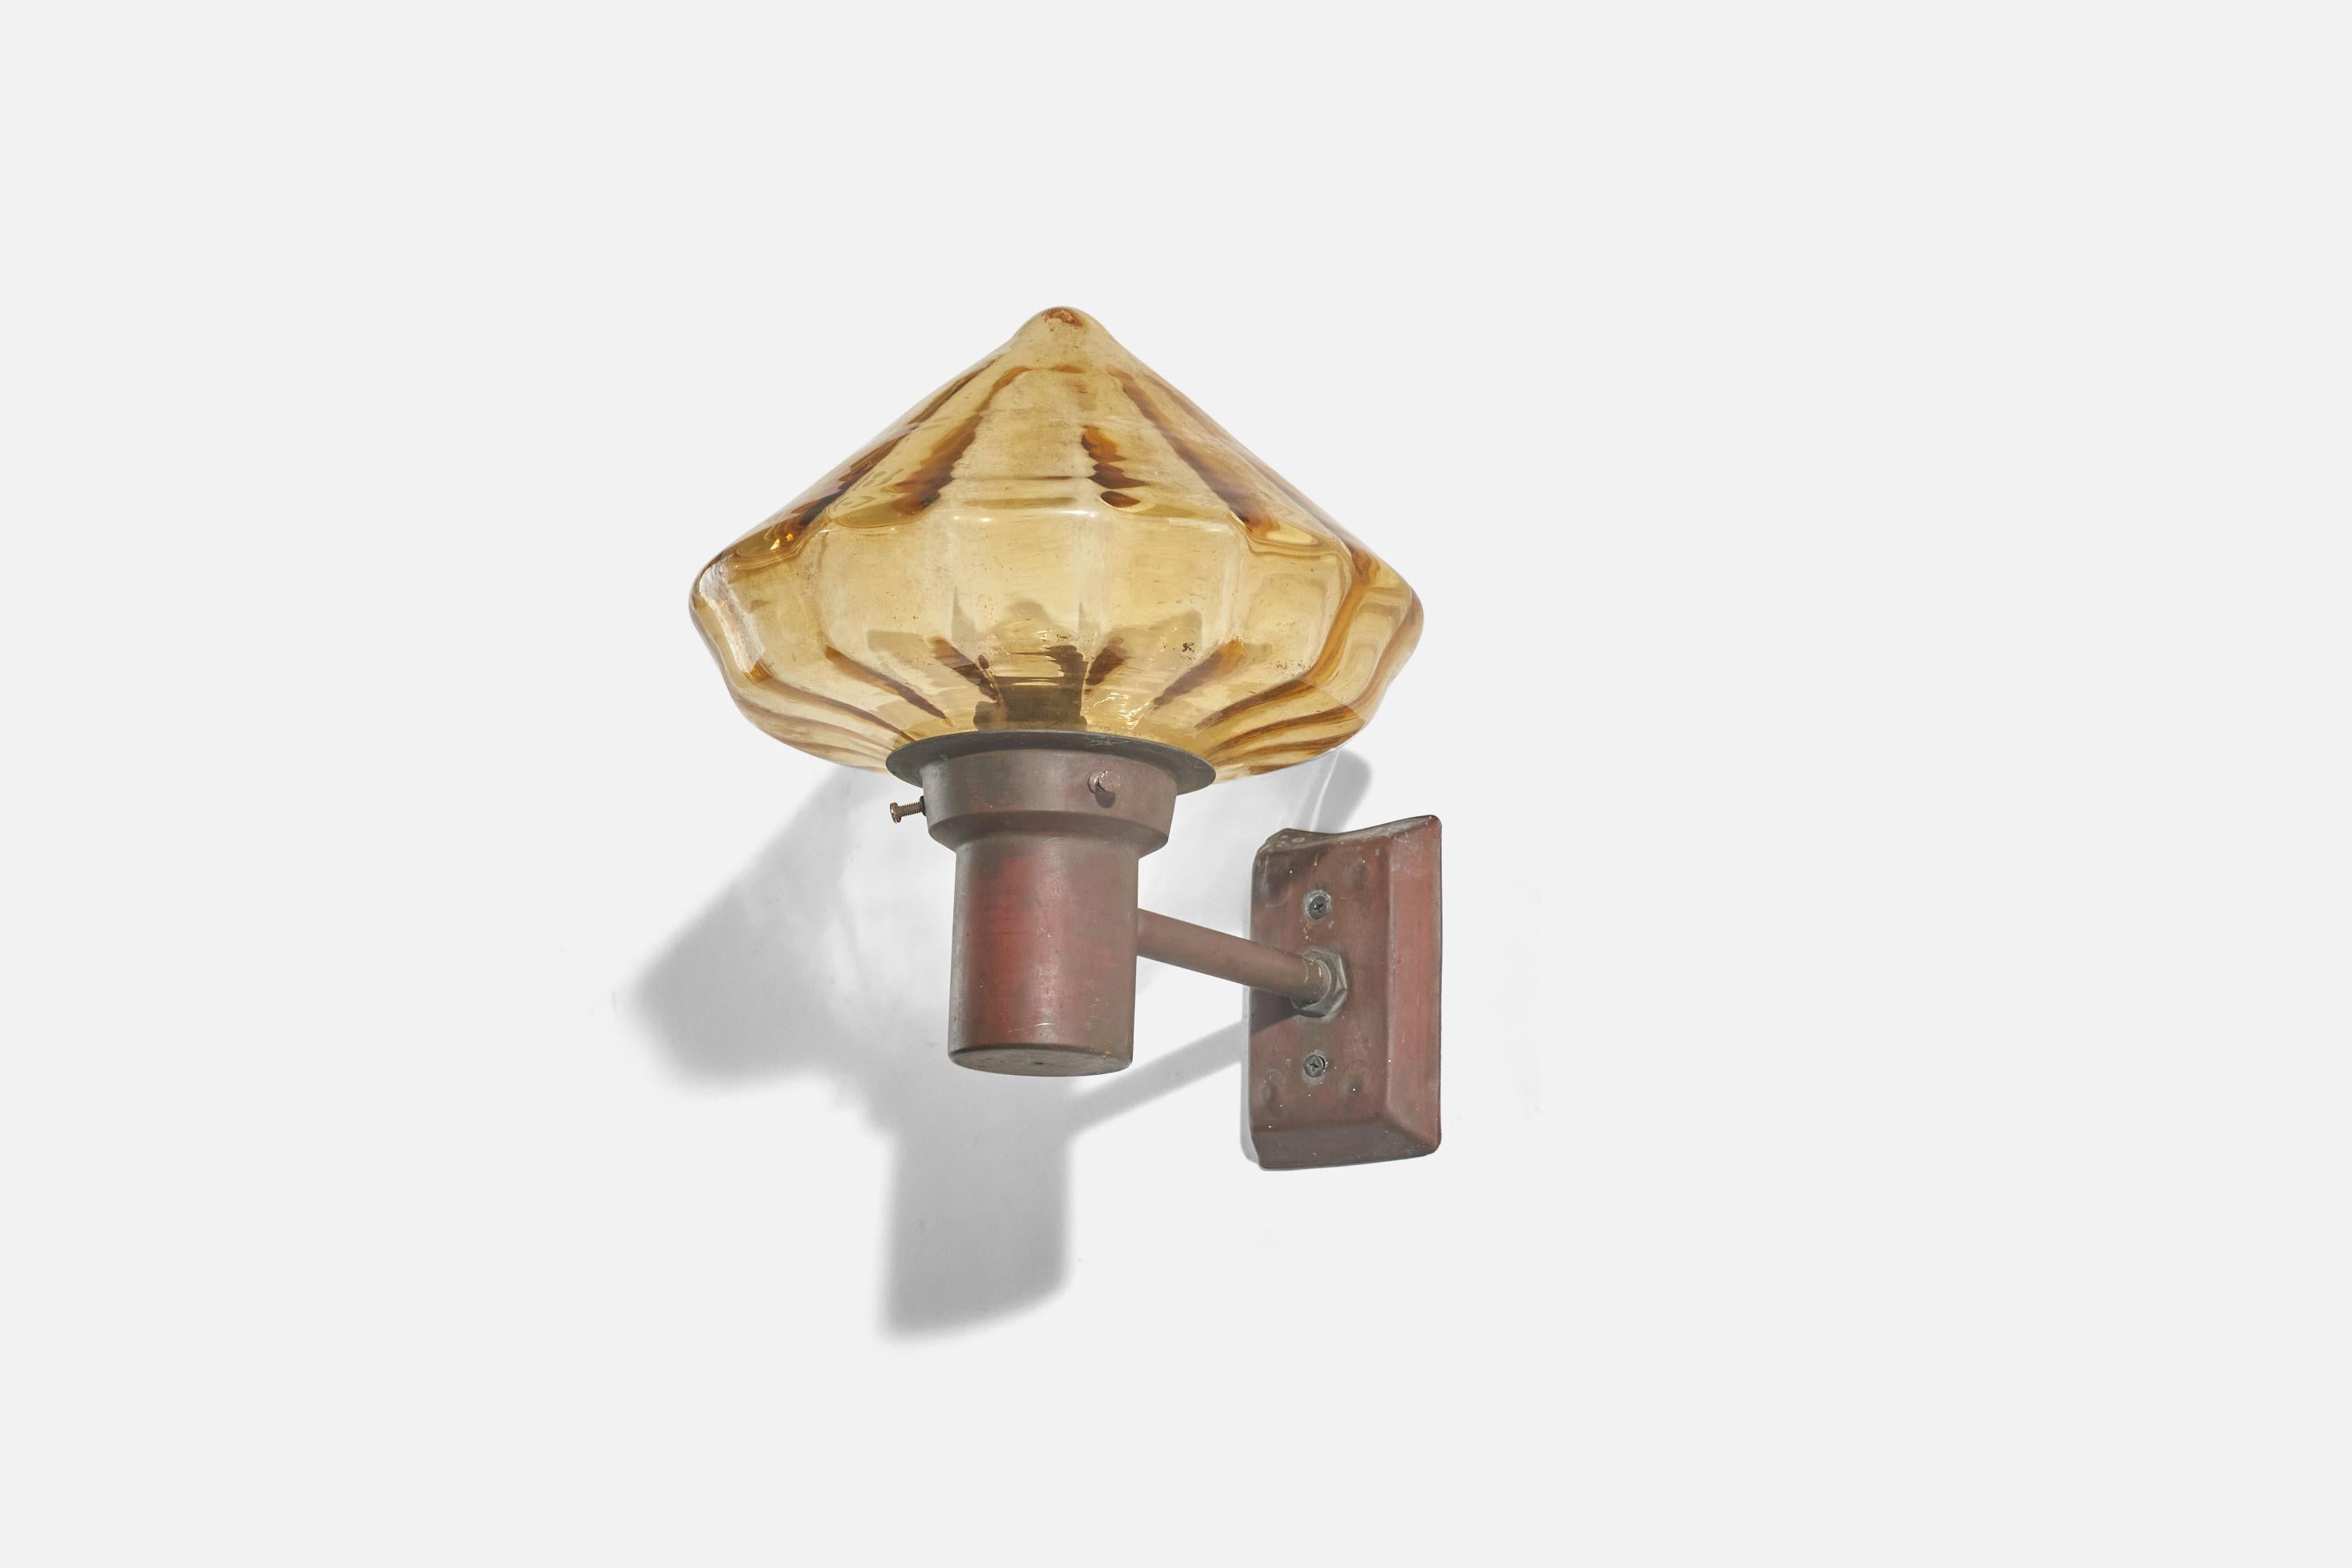 A copper and yellow glass sconce designed and produced in Sweden, c. 1940s.

Dimensions of Back Plate (inches) : 4.93 x 3.31 x 0.74 (Height x Width x Depth)

Socket takes standard E-26 medium base bulb.

There is no maximum wattage stated on the